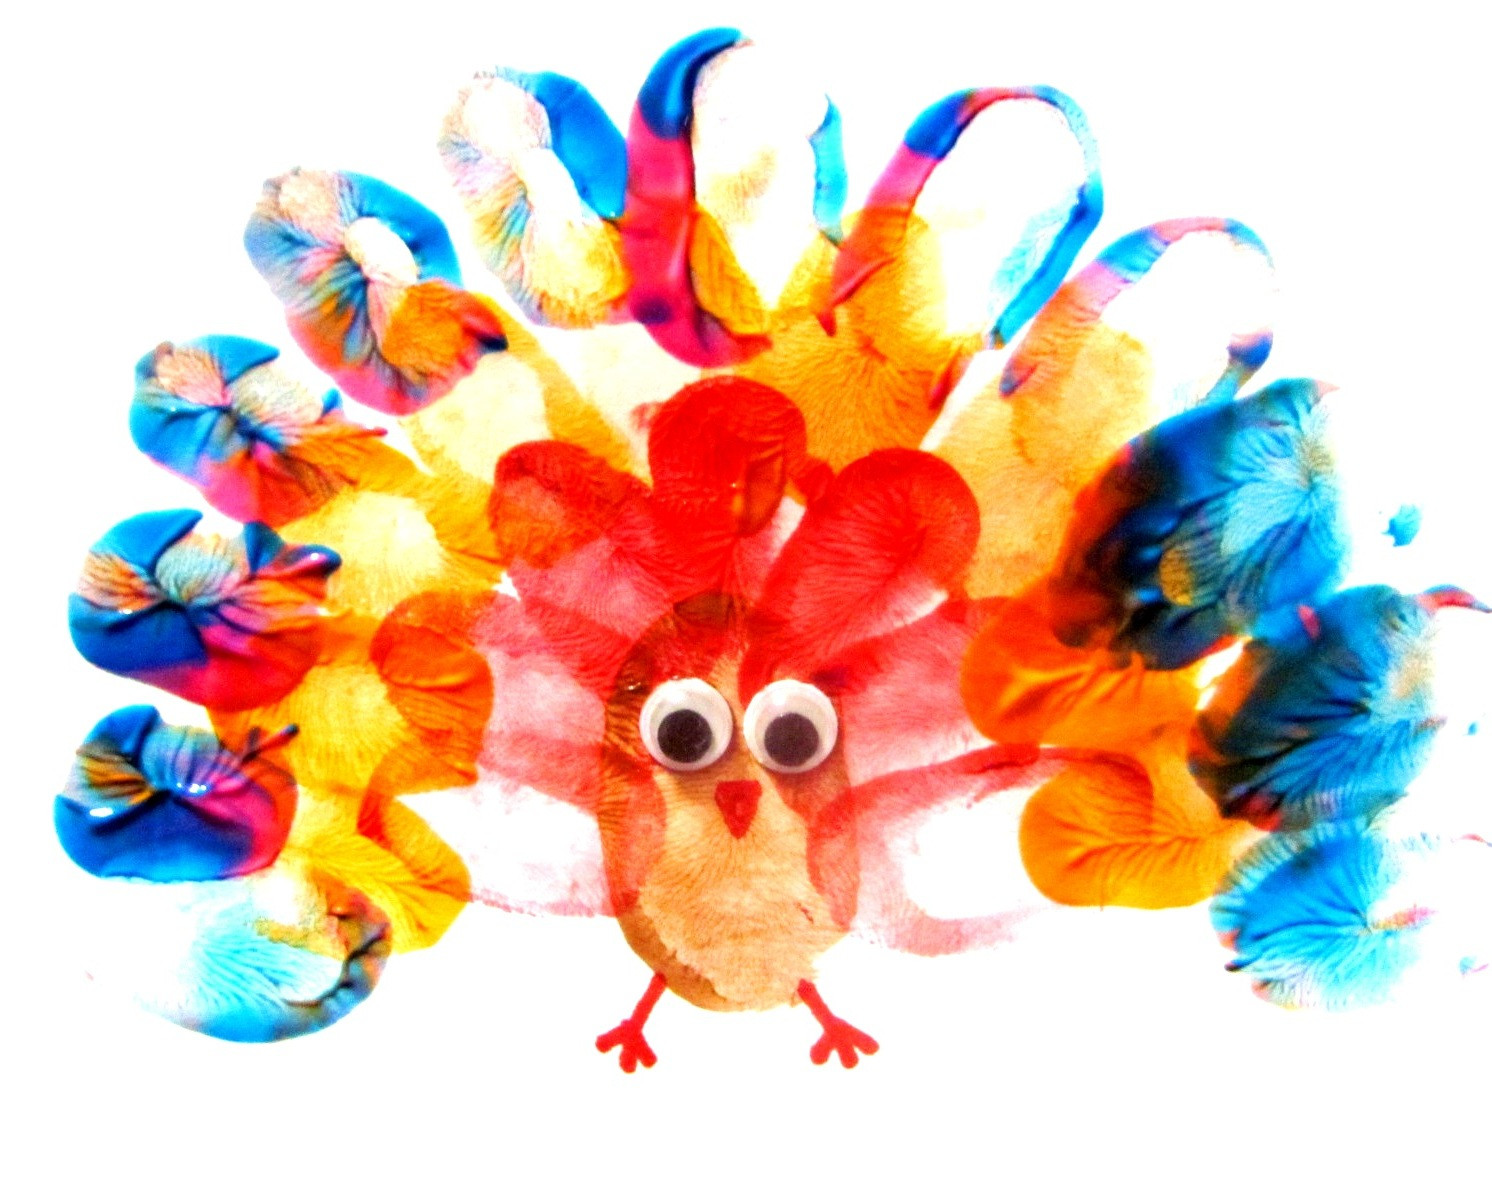 Thanksgiving Art Projects For Toddlers
 colormehappy Colormehappy Turkey fun thanks giving art